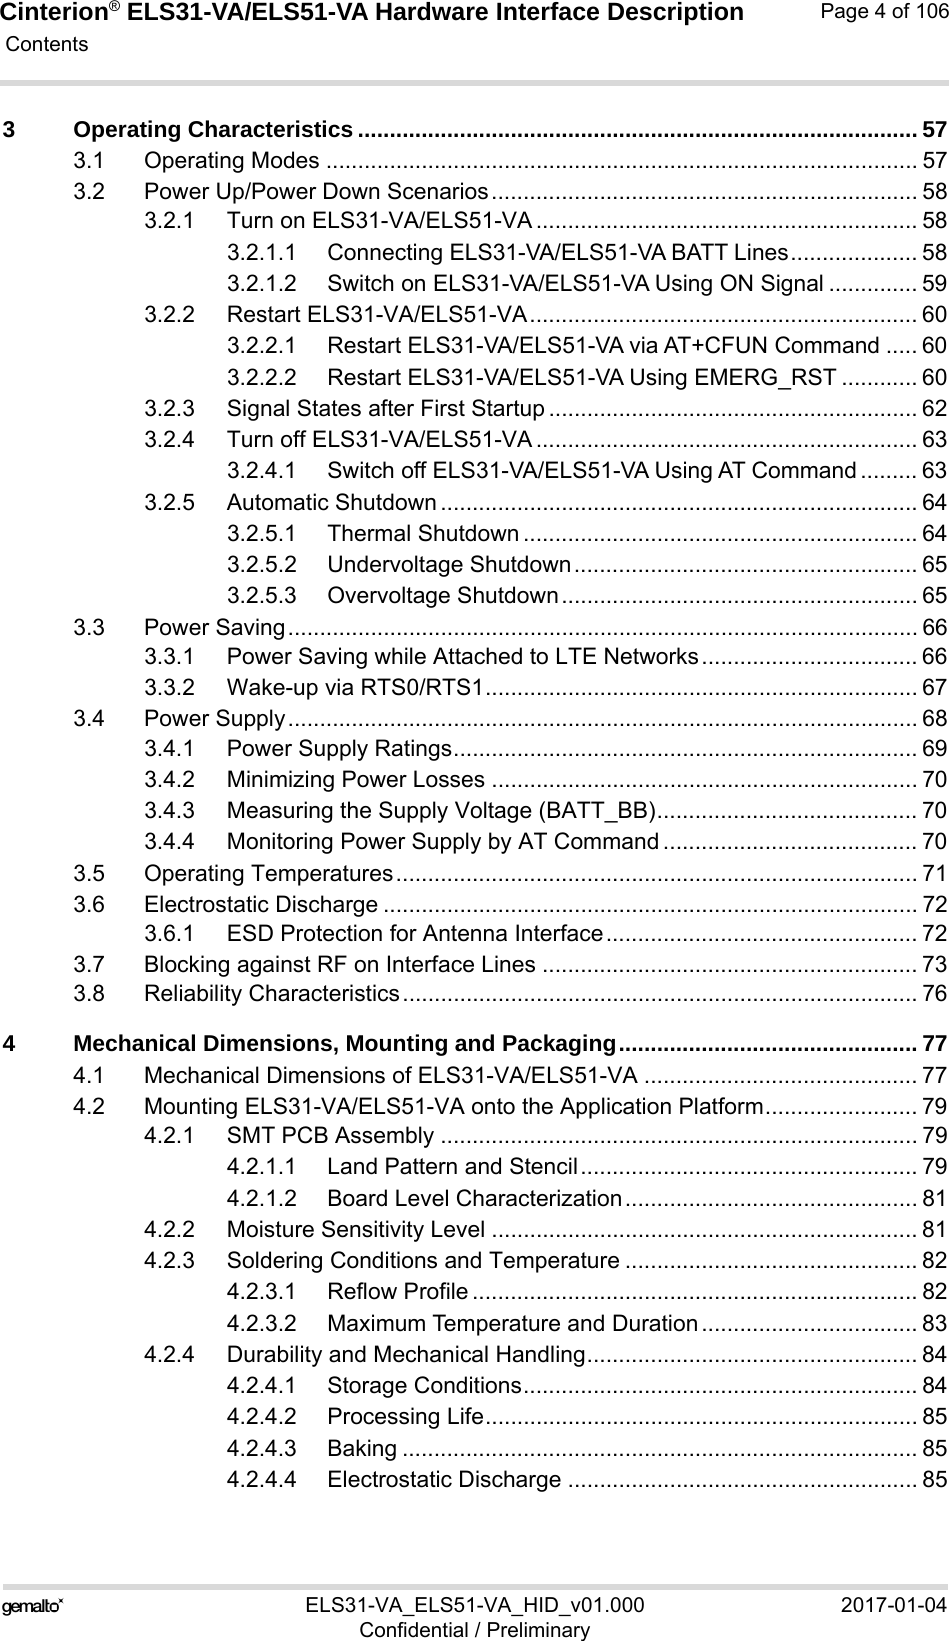 Cinterion® ELS31-VA/ELS51-VA Hardware Interface Description Contents106ELS31-VA_ELS51-VA_HID_v01.000 2017-01-04Confidential / PreliminaryPage 4 of 1063 Operating Characteristics ........................................................................................ 573.1 Operating Modes ............................................................................................. 573.2 Power Up/Power Down Scenarios................................................................... 583.2.1 Turn on ELS31-VA/ELS51-VA ............................................................ 583.2.1.1 Connecting ELS31-VA/ELS51-VA BATT Lines.................... 583.2.1.2 Switch on ELS31-VA/ELS51-VA Using ON Signal .............. 593.2.2 Restart ELS31-VA/ELS51-VA............................................................. 603.2.2.1 Restart ELS31-VA/ELS51-VA via AT+CFUN Command ..... 603.2.2.2 Restart ELS31-VA/ELS51-VA Using EMERG_RST ............ 603.2.3 Signal States after First Startup .......................................................... 623.2.4 Turn off ELS31-VA/ELS51-VA ............................................................ 633.2.4.1 Switch off ELS31-VA/ELS51-VA Using AT Command ......... 633.2.5 Automatic Shutdown ........................................................................... 643.2.5.1 Thermal Shutdown .............................................................. 643.2.5.2 Undervoltage Shutdown...................................................... 653.2.5.3 Overvoltage Shutdown........................................................ 653.3 Power Saving................................................................................................... 663.3.1 Power Saving while Attached to LTE Networks.................................. 663.3.2 Wake-up via RTS0/RTS1.................................................................... 673.4 Power Supply................................................................................................... 683.4.1 Power Supply Ratings......................................................................... 693.4.2 Minimizing Power Losses ................................................................... 703.4.3 Measuring the Supply Voltage (BATT_BB)......................................... 703.4.4 Monitoring Power Supply by AT Command ........................................ 703.5 Operating Temperatures.................................................................................. 713.6 Electrostatic Discharge .................................................................................... 723.6.1 ESD Protection for Antenna Interface................................................. 723.7 Blocking against RF on Interface Lines ........................................................... 733.8 Reliability Characteristics................................................................................. 764 Mechanical Dimensions, Mounting and Packaging............................................... 774.1 Mechanical Dimensions of ELS31-VA/ELS51-VA ........................................... 774.2 Mounting ELS31-VA/ELS51-VA onto the Application Platform........................ 794.2.1 SMT PCB Assembly ........................................................................... 794.2.1.1 Land Pattern and Stencil..................................................... 794.2.1.2 Board Level Characterization.............................................. 814.2.2 Moisture Sensitivity Level ................................................................... 814.2.3 Soldering Conditions and Temperature .............................................. 824.2.3.1 Reflow Profile ...................................................................... 824.2.3.2 Maximum Temperature and Duration.................................. 834.2.4 Durability and Mechanical Handling.................................................... 844.2.4.1 Storage Conditions.............................................................. 844.2.4.2 Processing Life.................................................................... 854.2.4.3 Baking ................................................................................. 854.2.4.4 Electrostatic Discharge ....................................................... 85